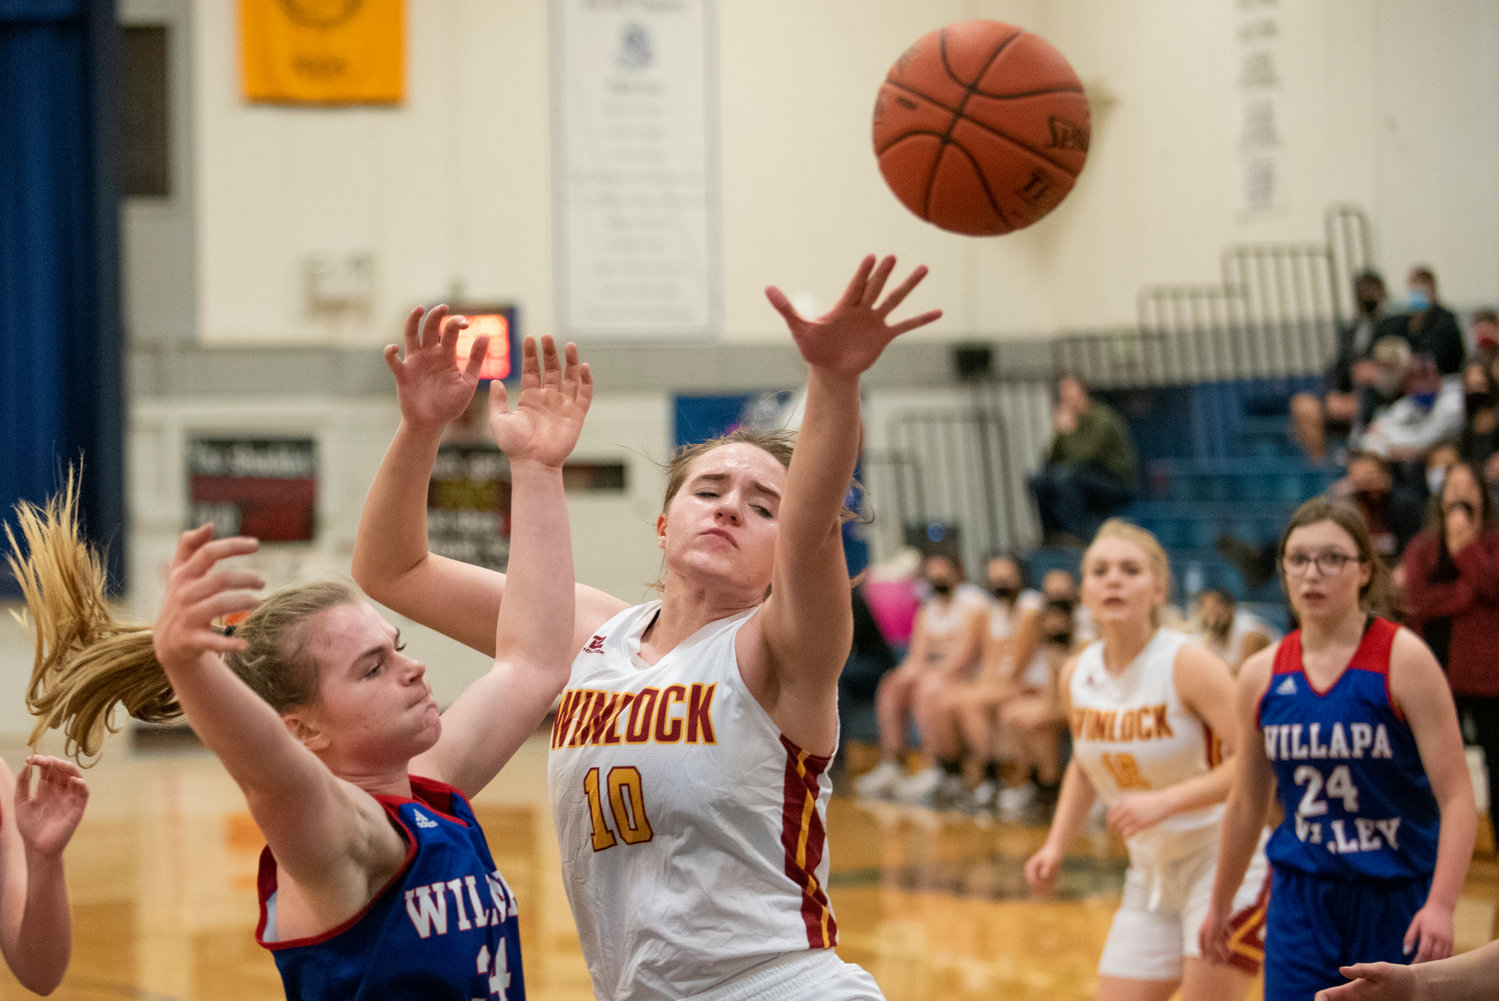 Winlock's Madison Vigre (10) reaches for a loose ball against Willapa Valley on Jan. 21.